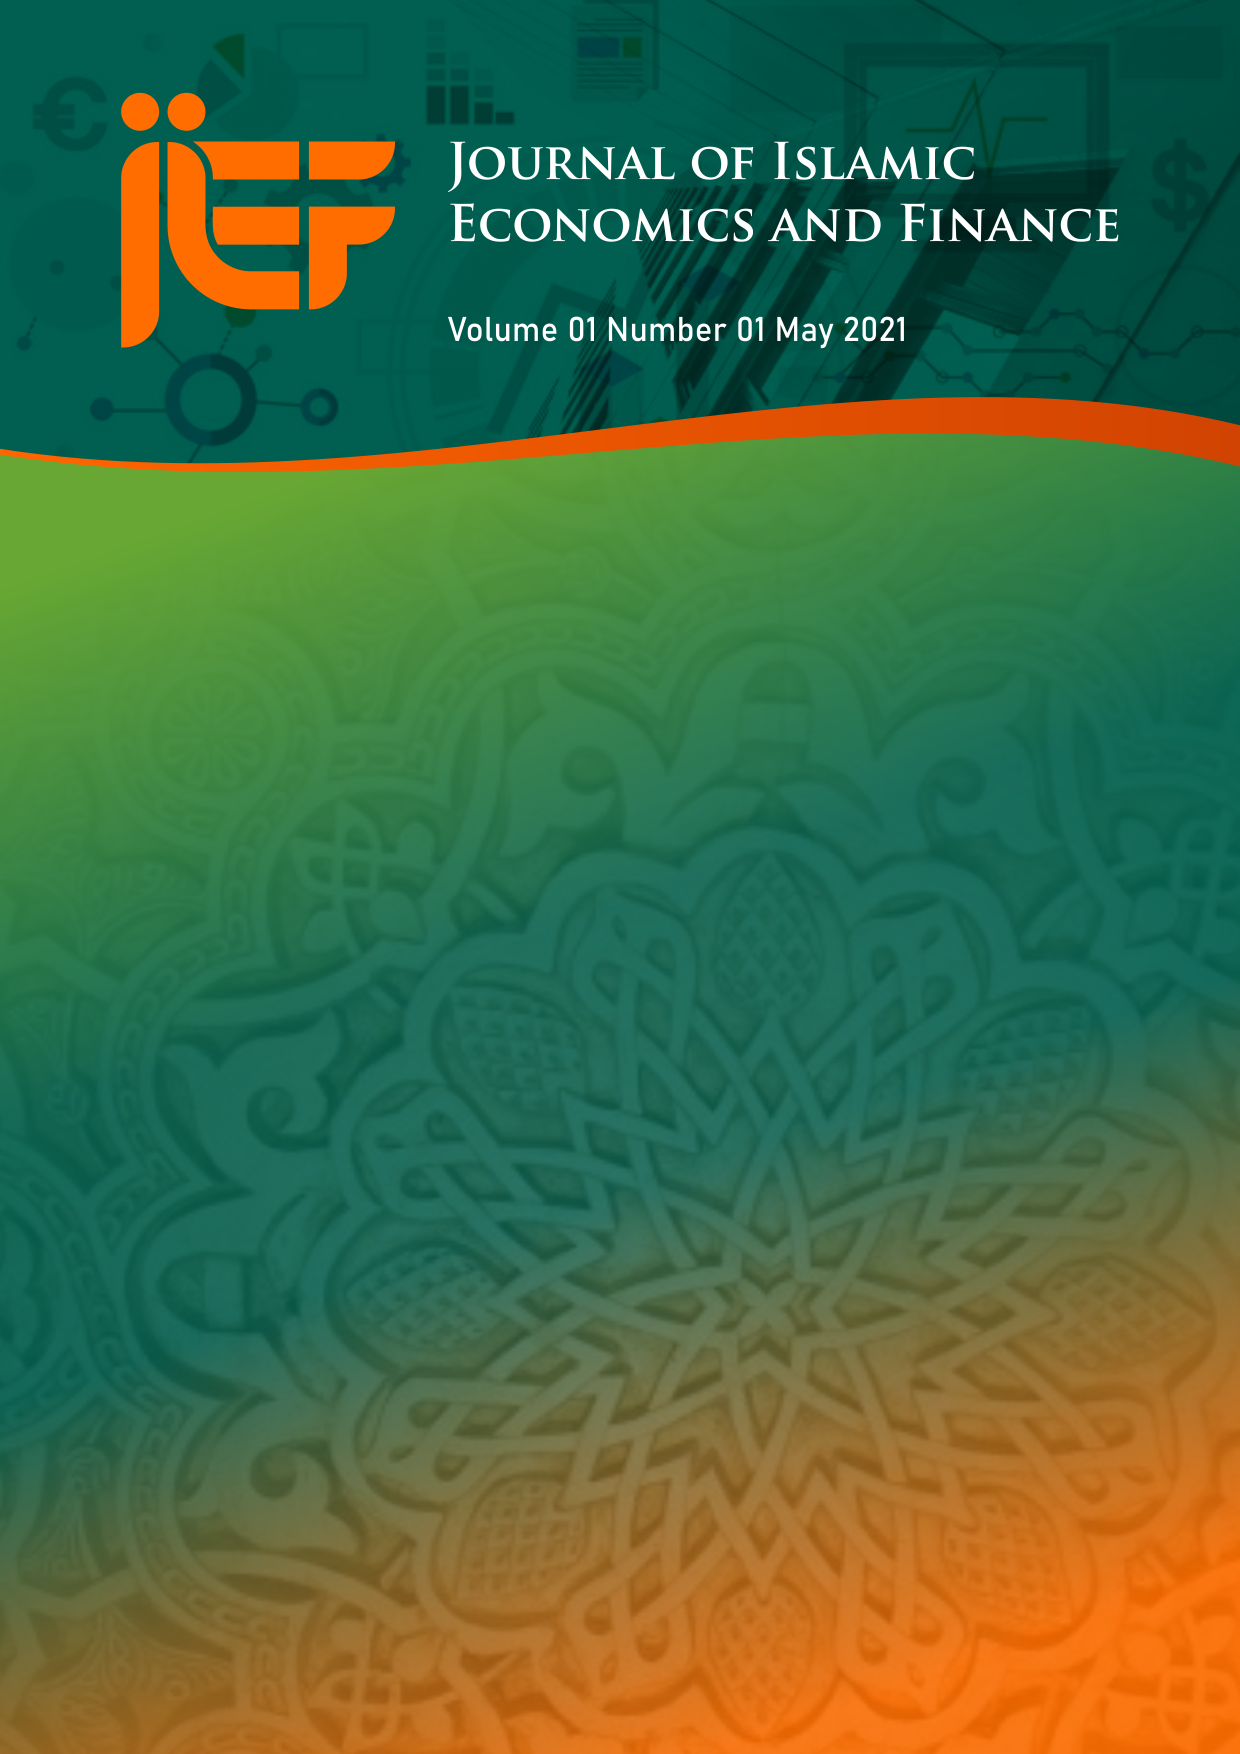 Journal of Islamic Economics and Finance (JIEF) is an journal providing authoritative sources of scientific information for researchers and scholars in academia, research institutions, government agencies, and industries. JIEF publish original research papers, review article and case studies focused on Islamic Economics and Finance as well as related topics. All papers are peer-reviewed by at least two reviewers. JIEF is published and printed by UIN K.H Abdurrahman Wahid Pekalongan